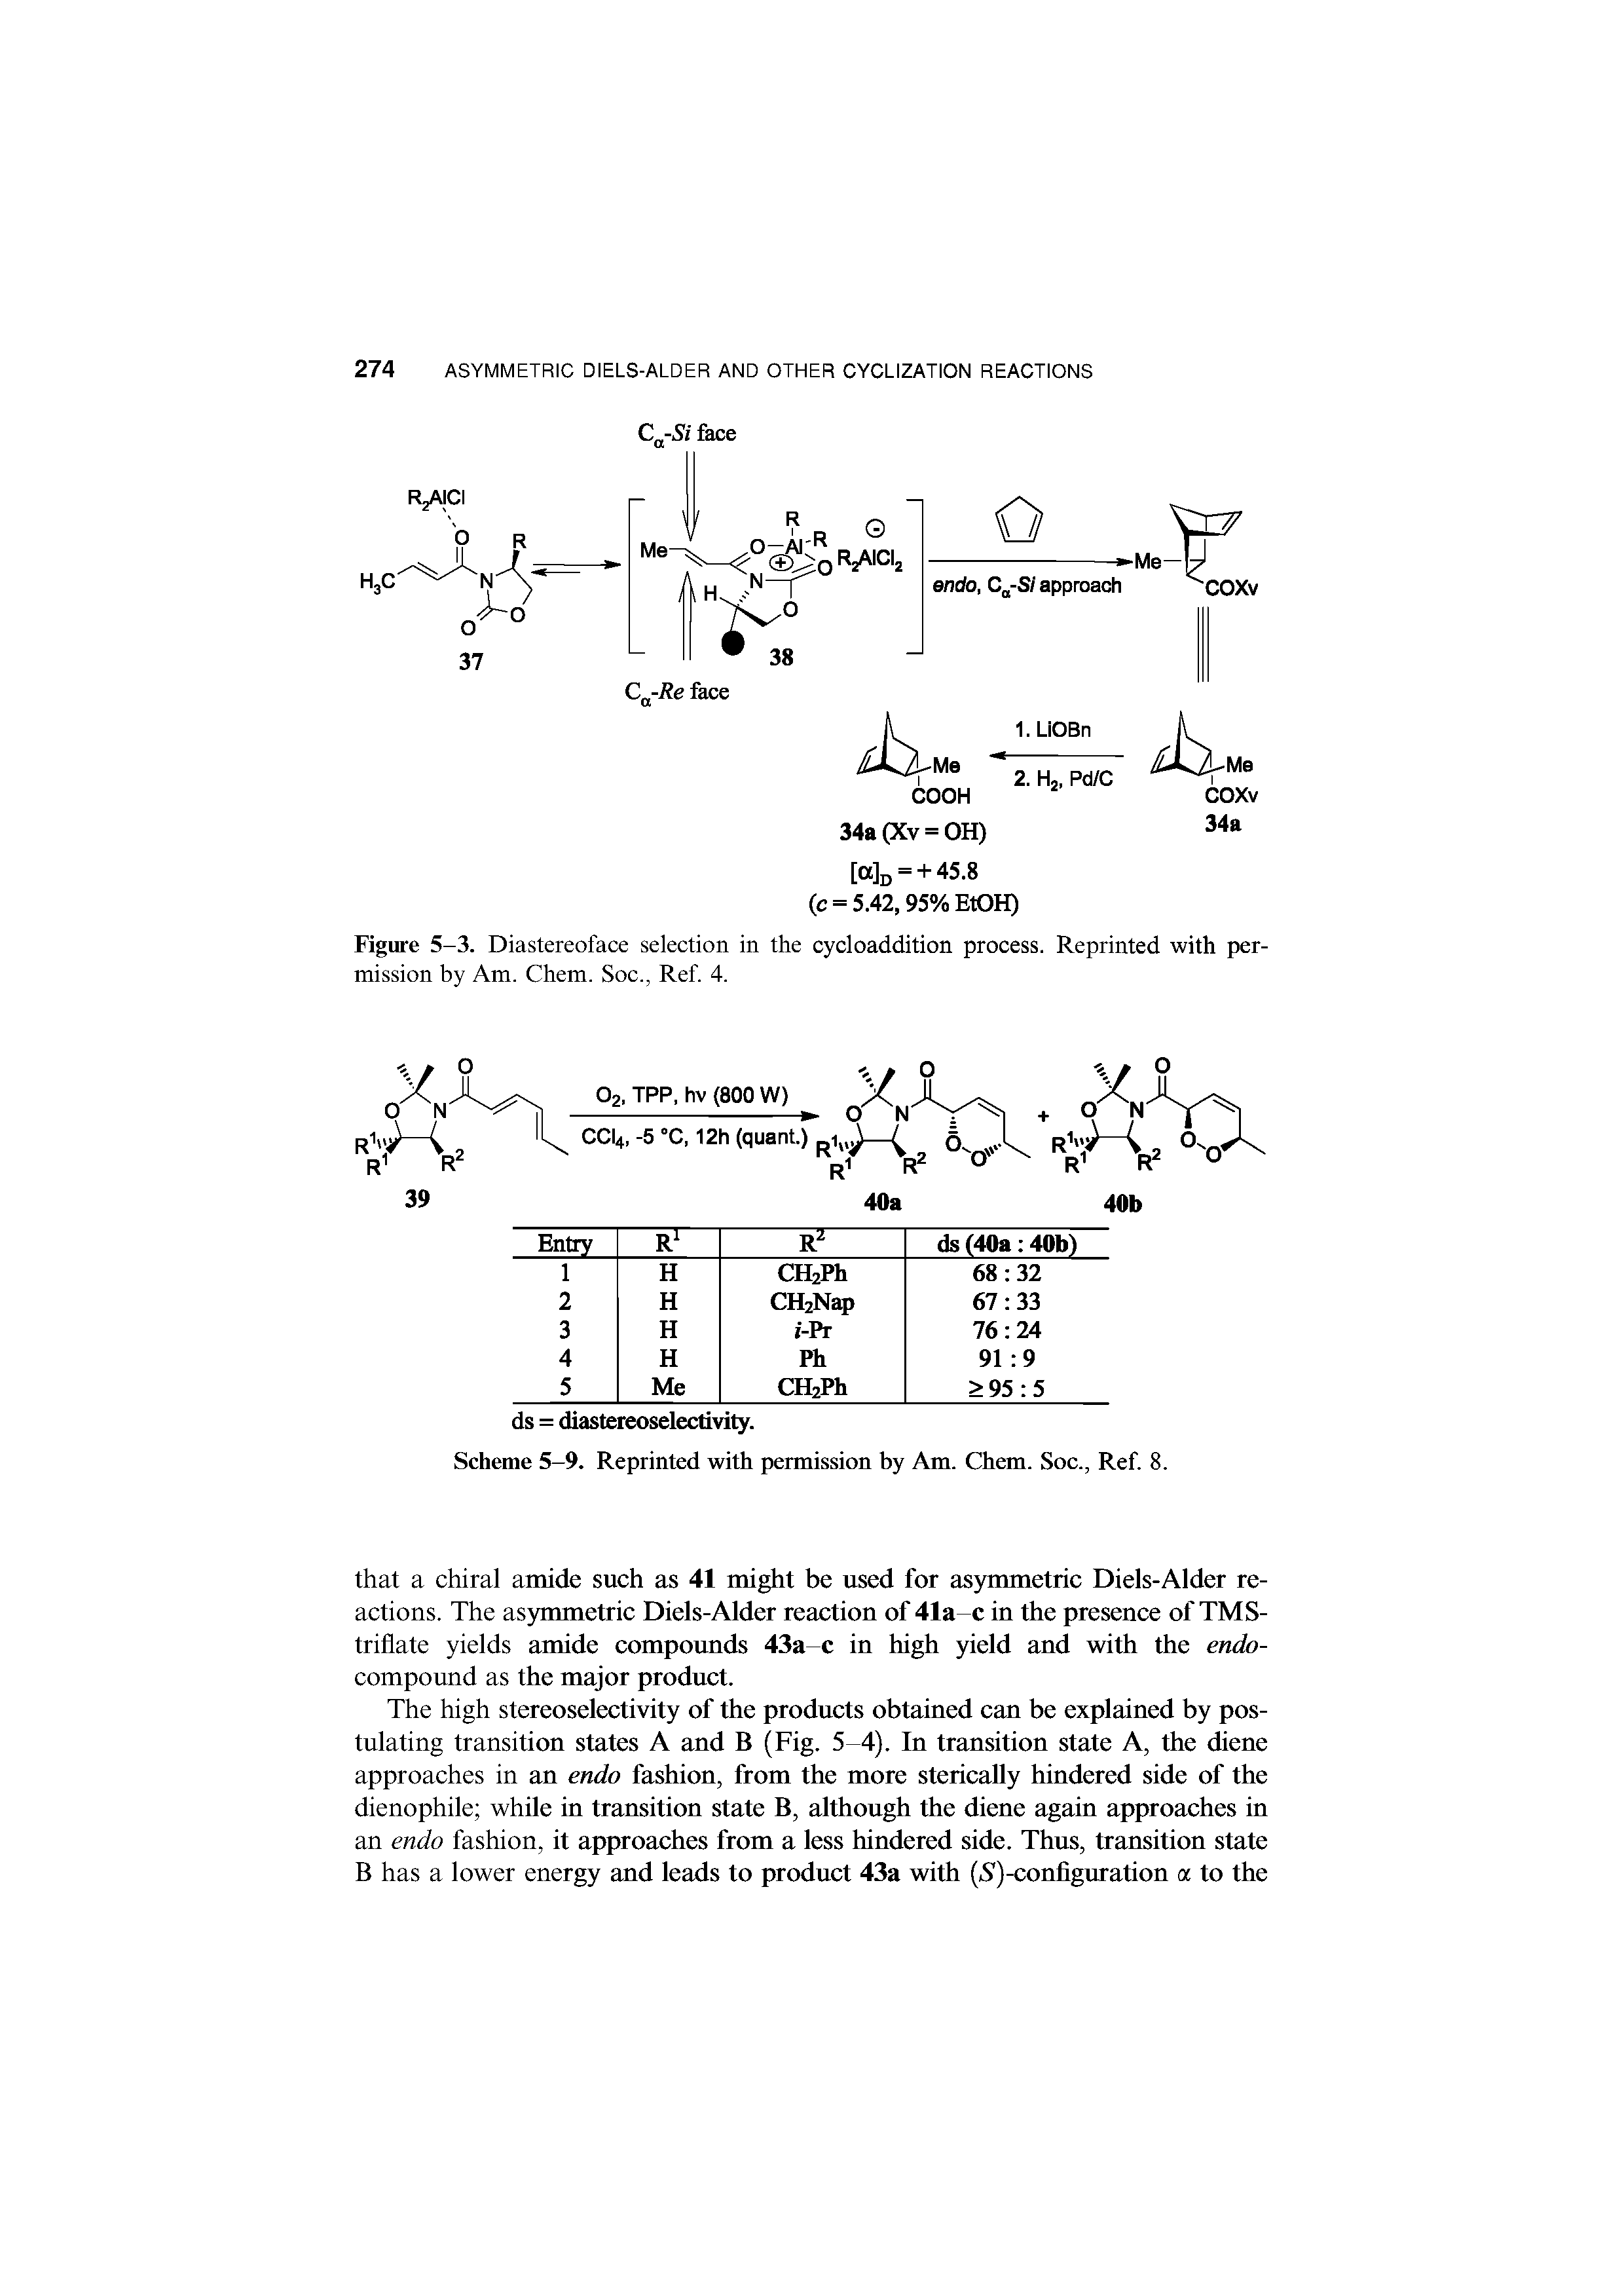 Figure 5-3. Diastereoface selection in the cycloaddition process. Reprinted with permission by Am. Chem. Soc., Ref. 4.